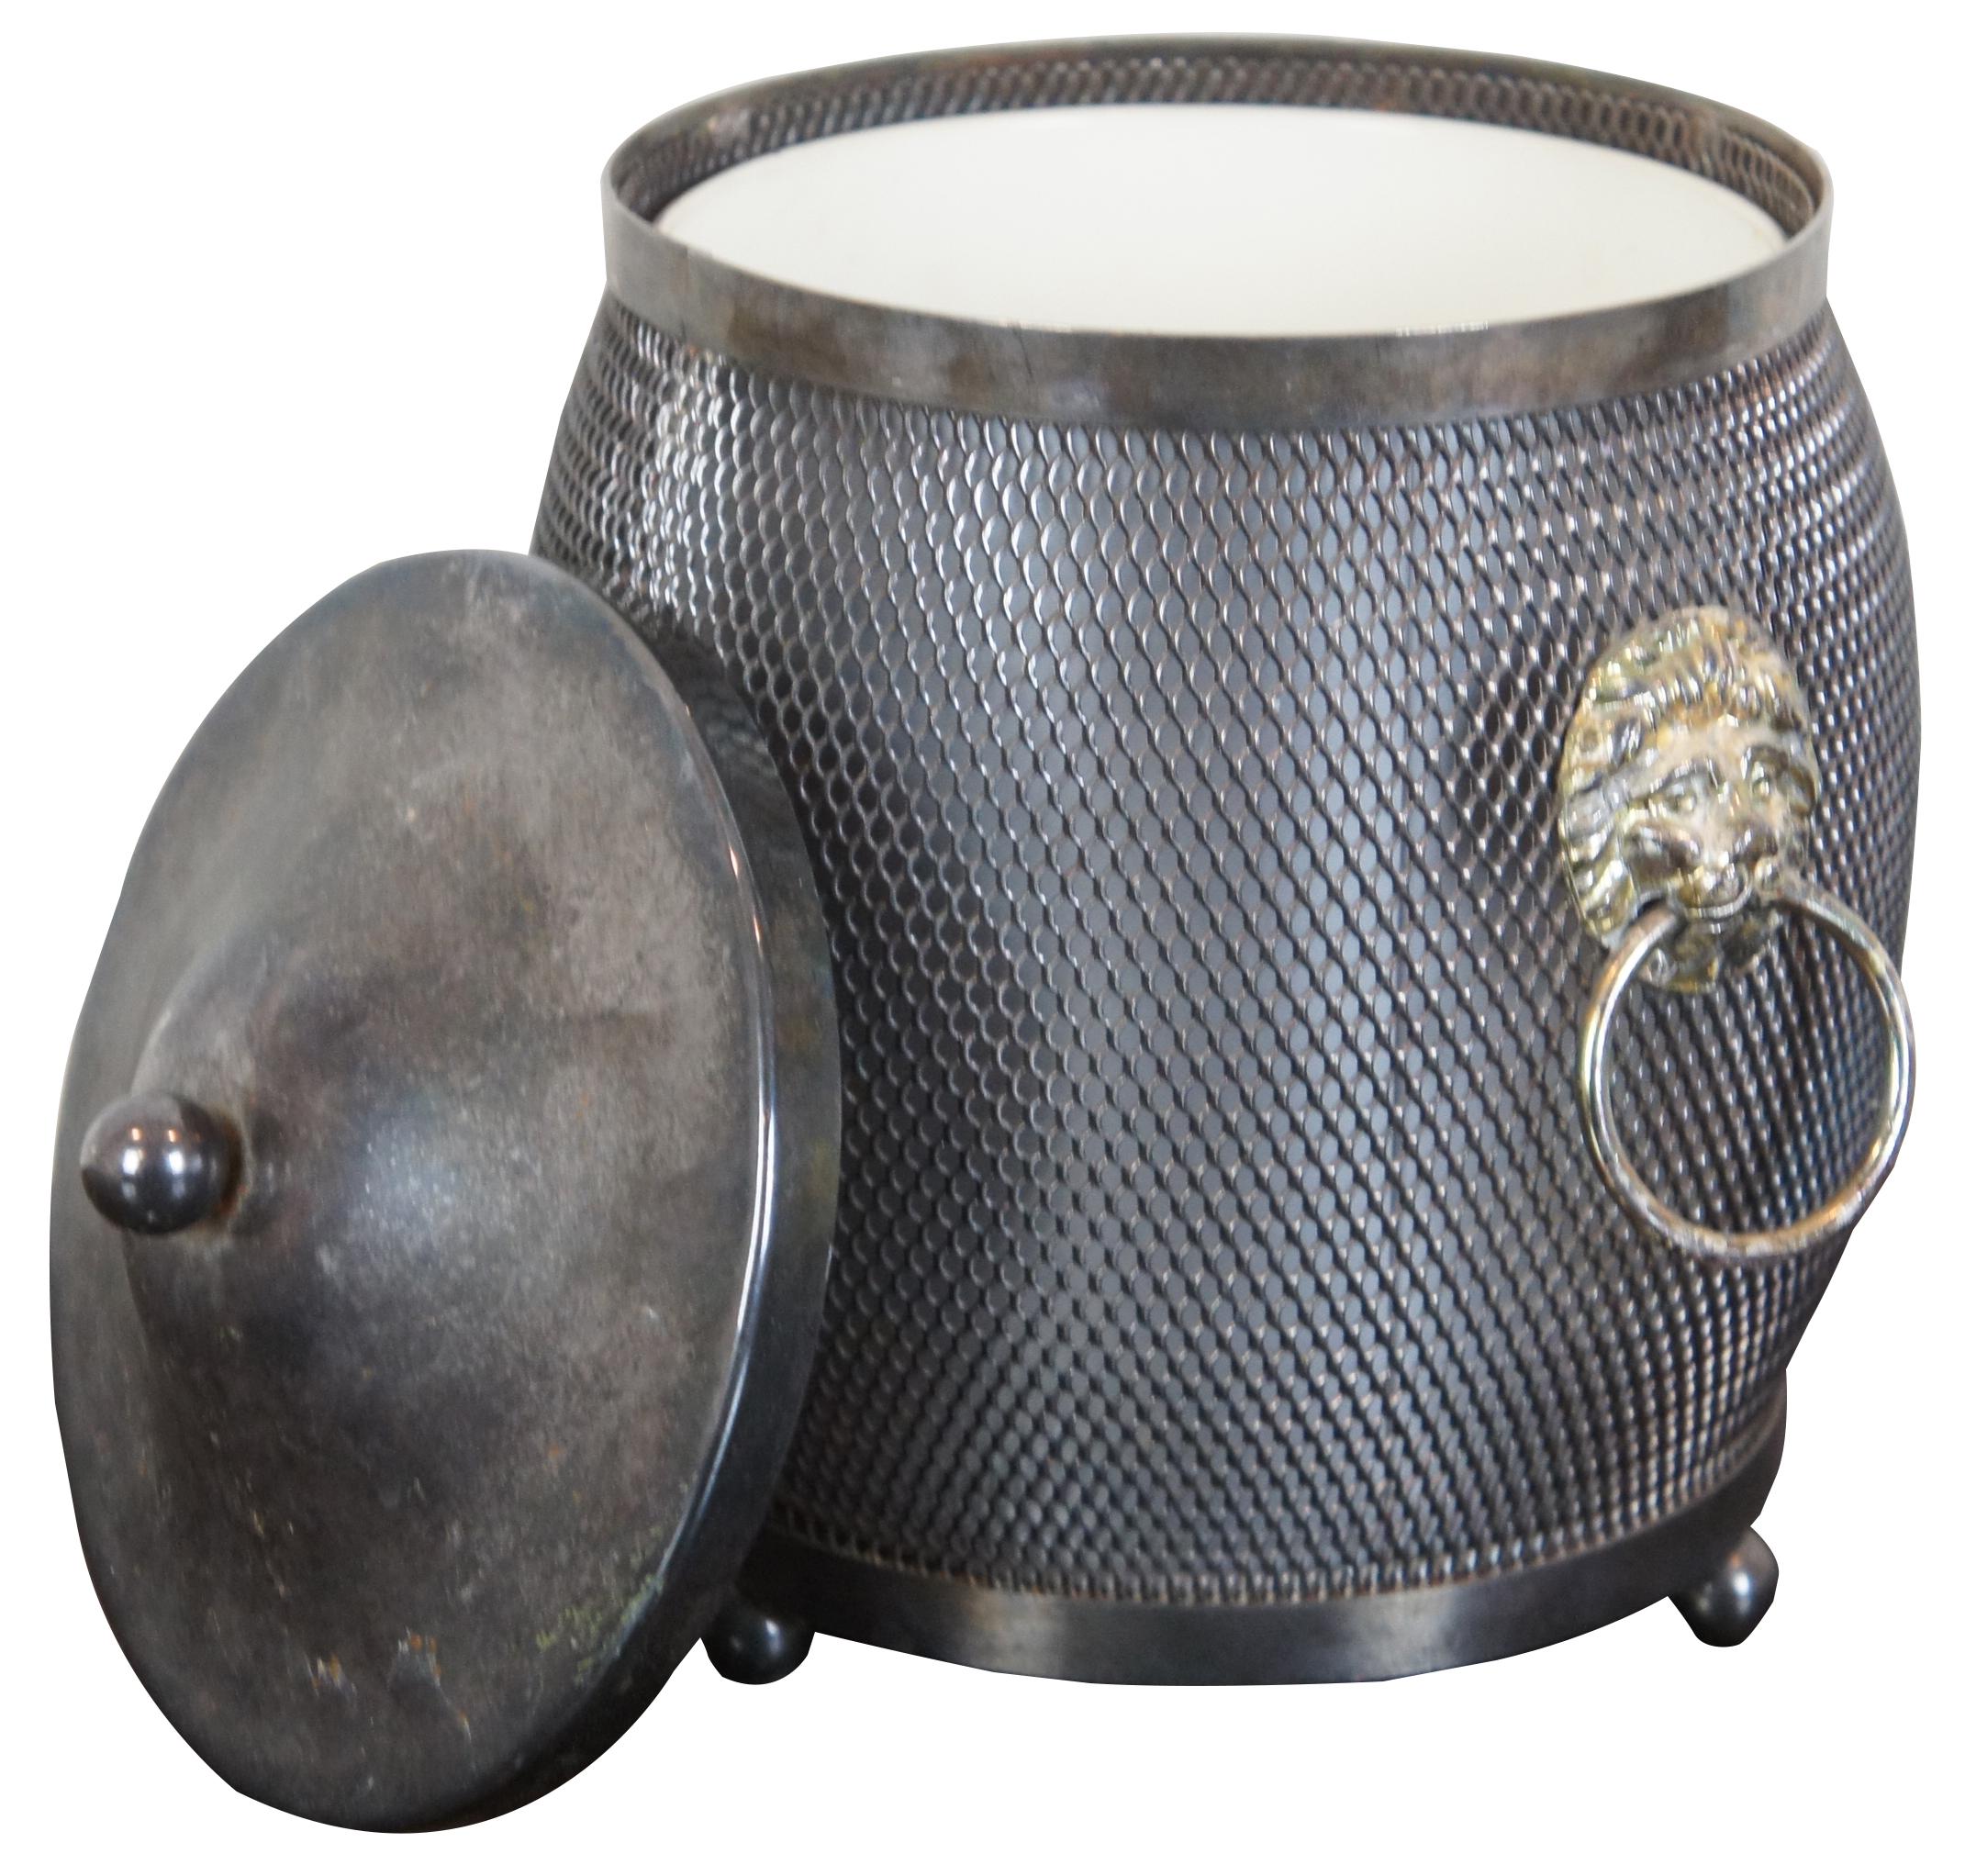 Vintage made in England biscuit barrel, tea caddy or small ice bucket made of metal mesh with shield accent (no monogram) and lions head handles. Includes tin insert. Measure: 8